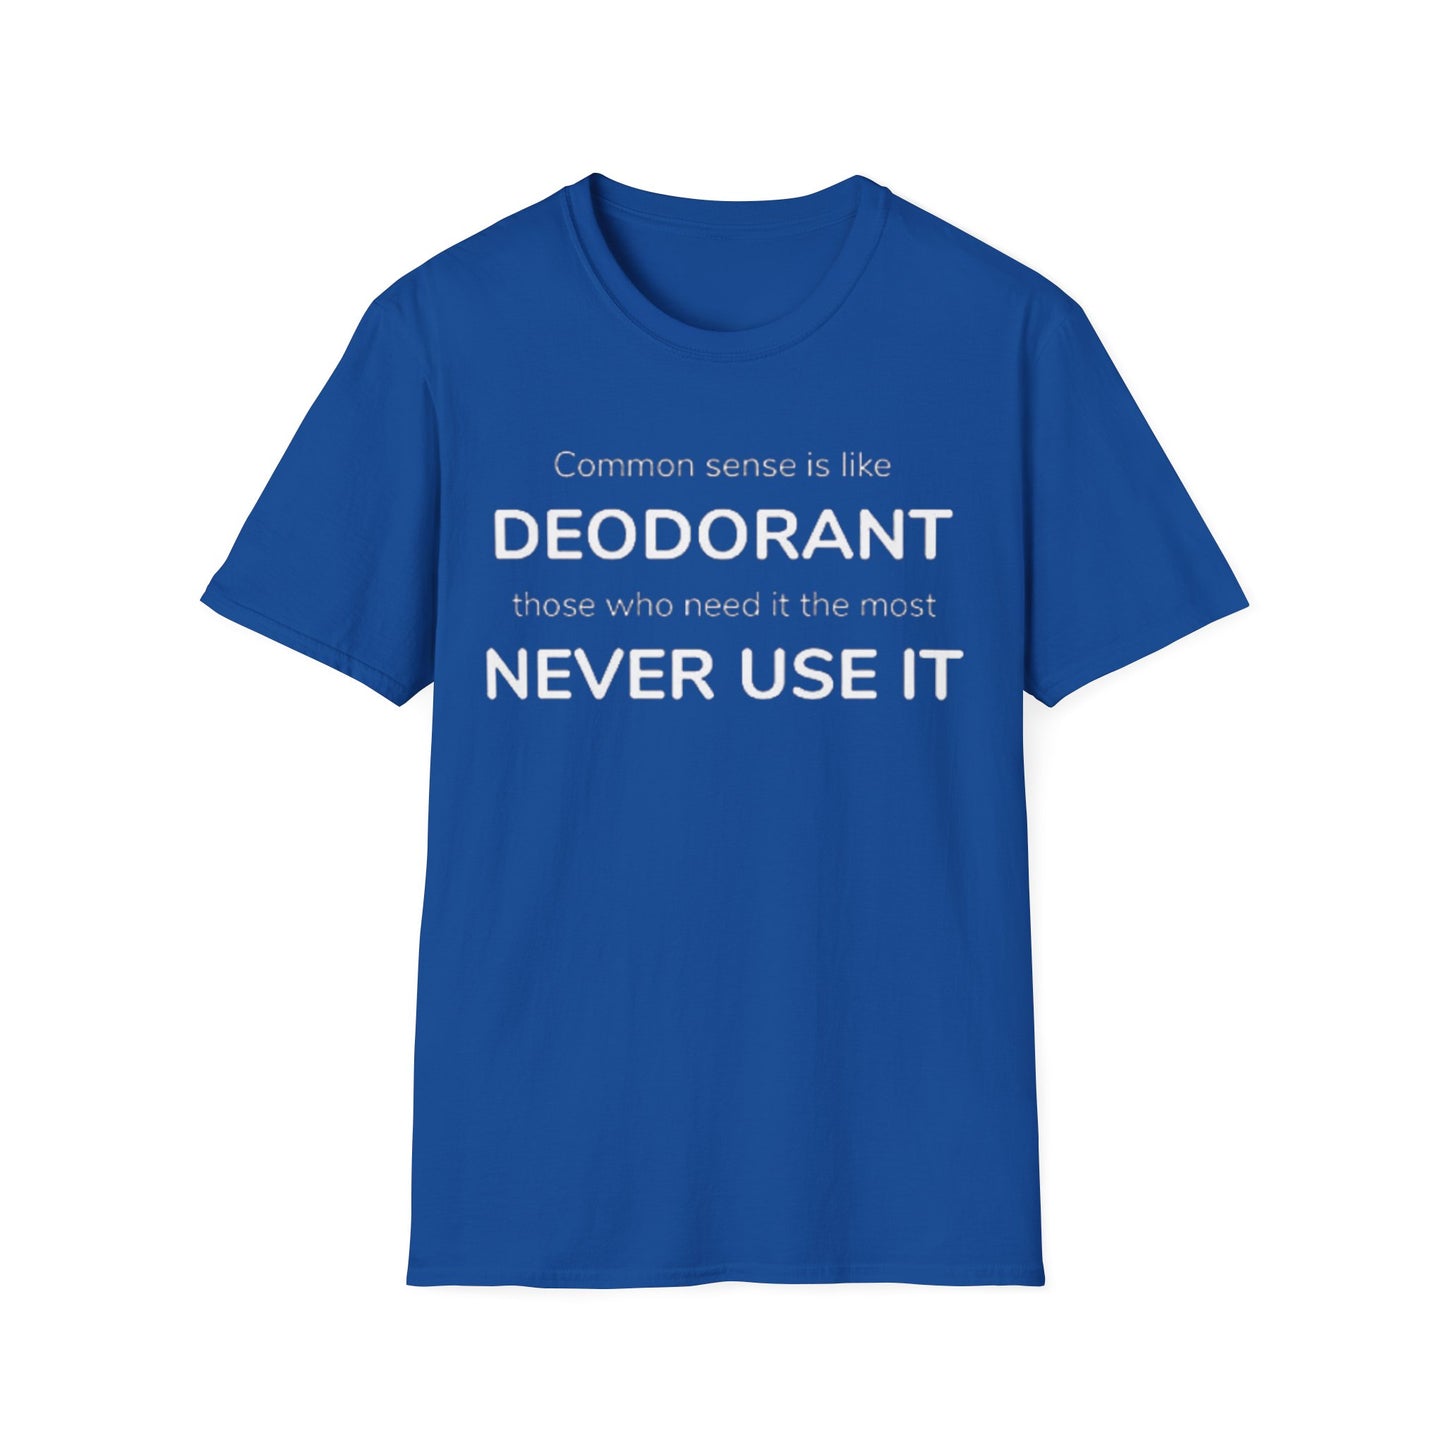 Common sense is like deodorant those who need it the most never use it - Unisex Softstyle T-Shirt